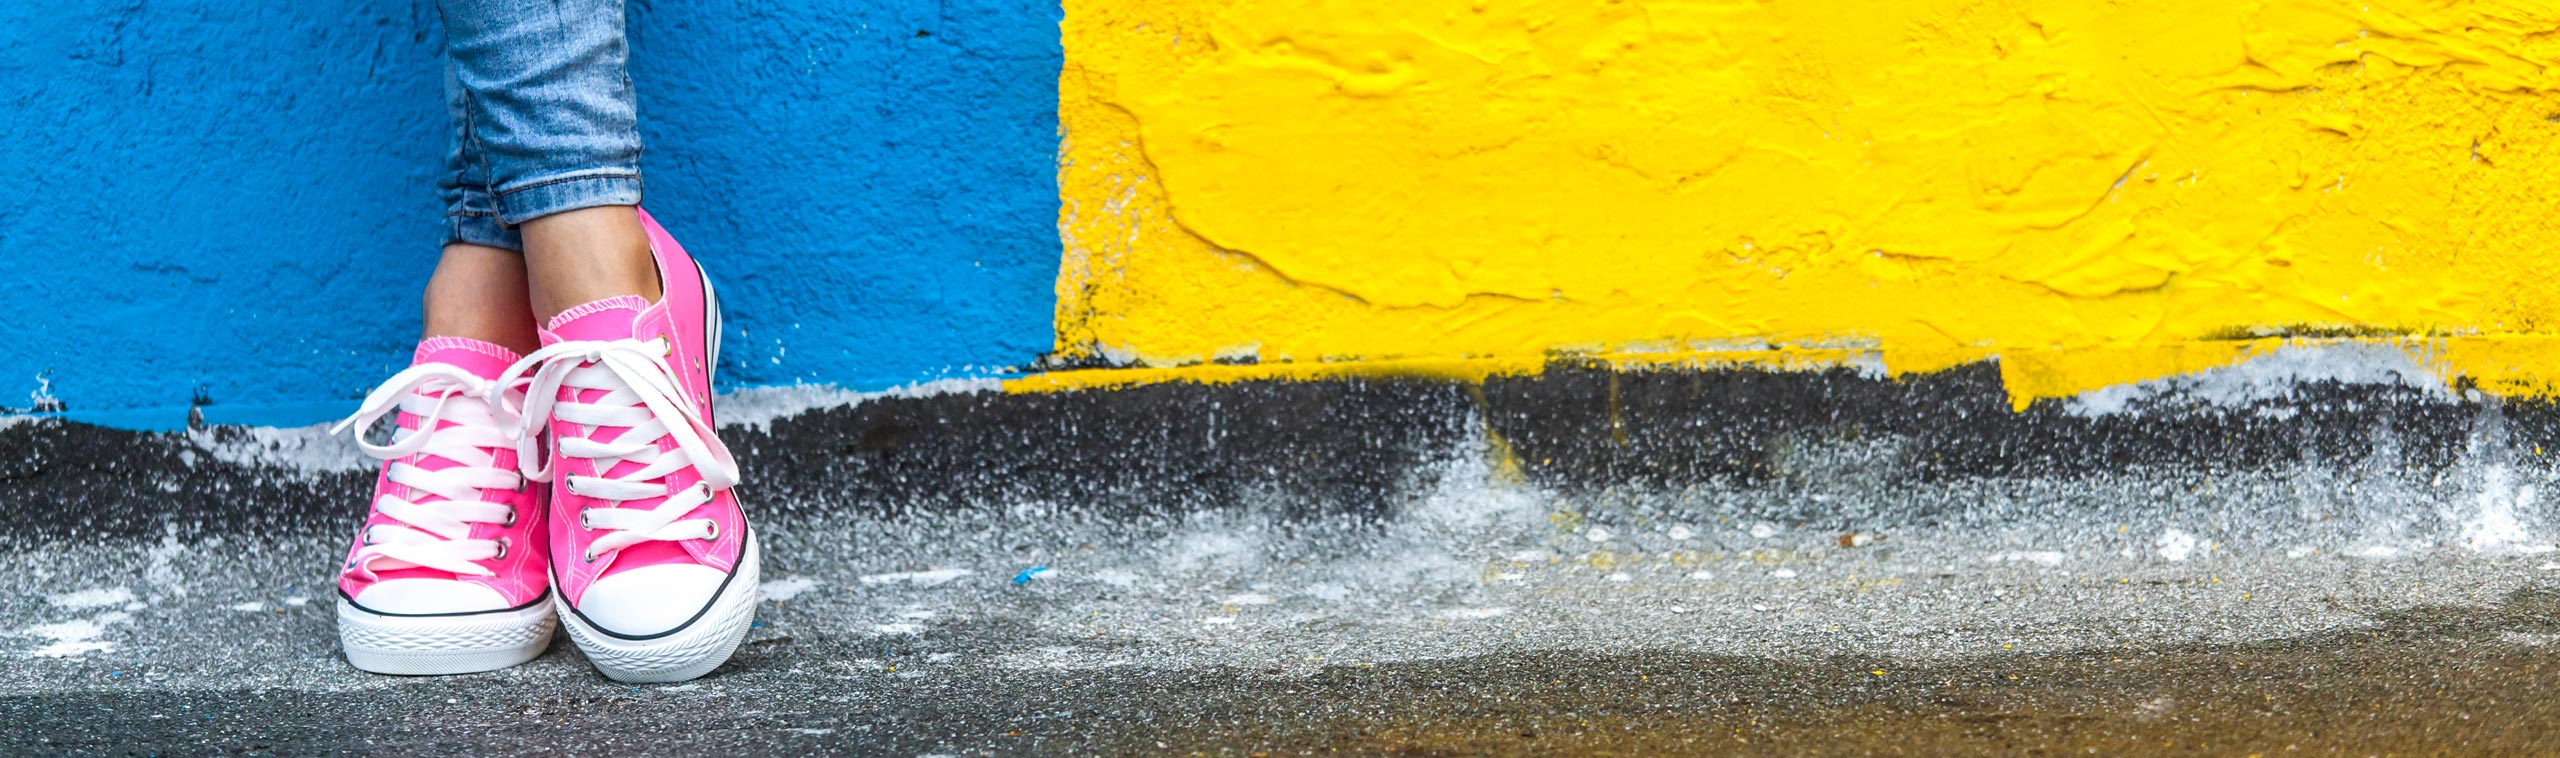 The legs of a girl in blue jeans and pink trainers in front of a blue and yellow wall